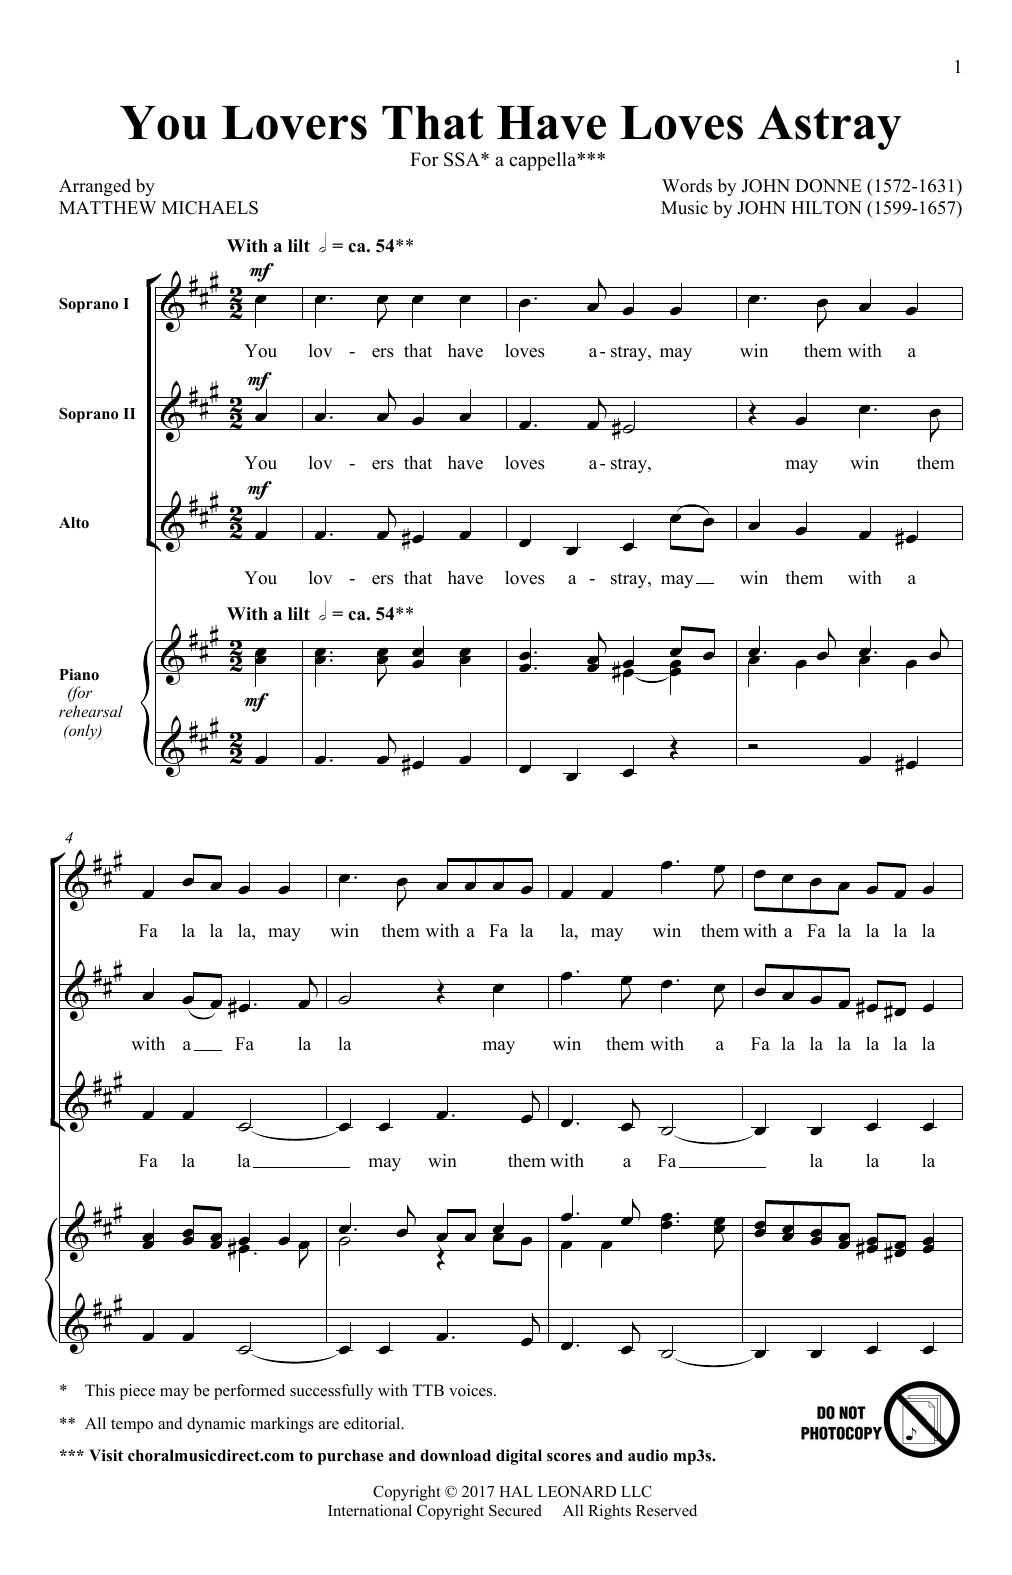 Download Matthew Michaels You Lovers That Have Loves Astray Sheet Music